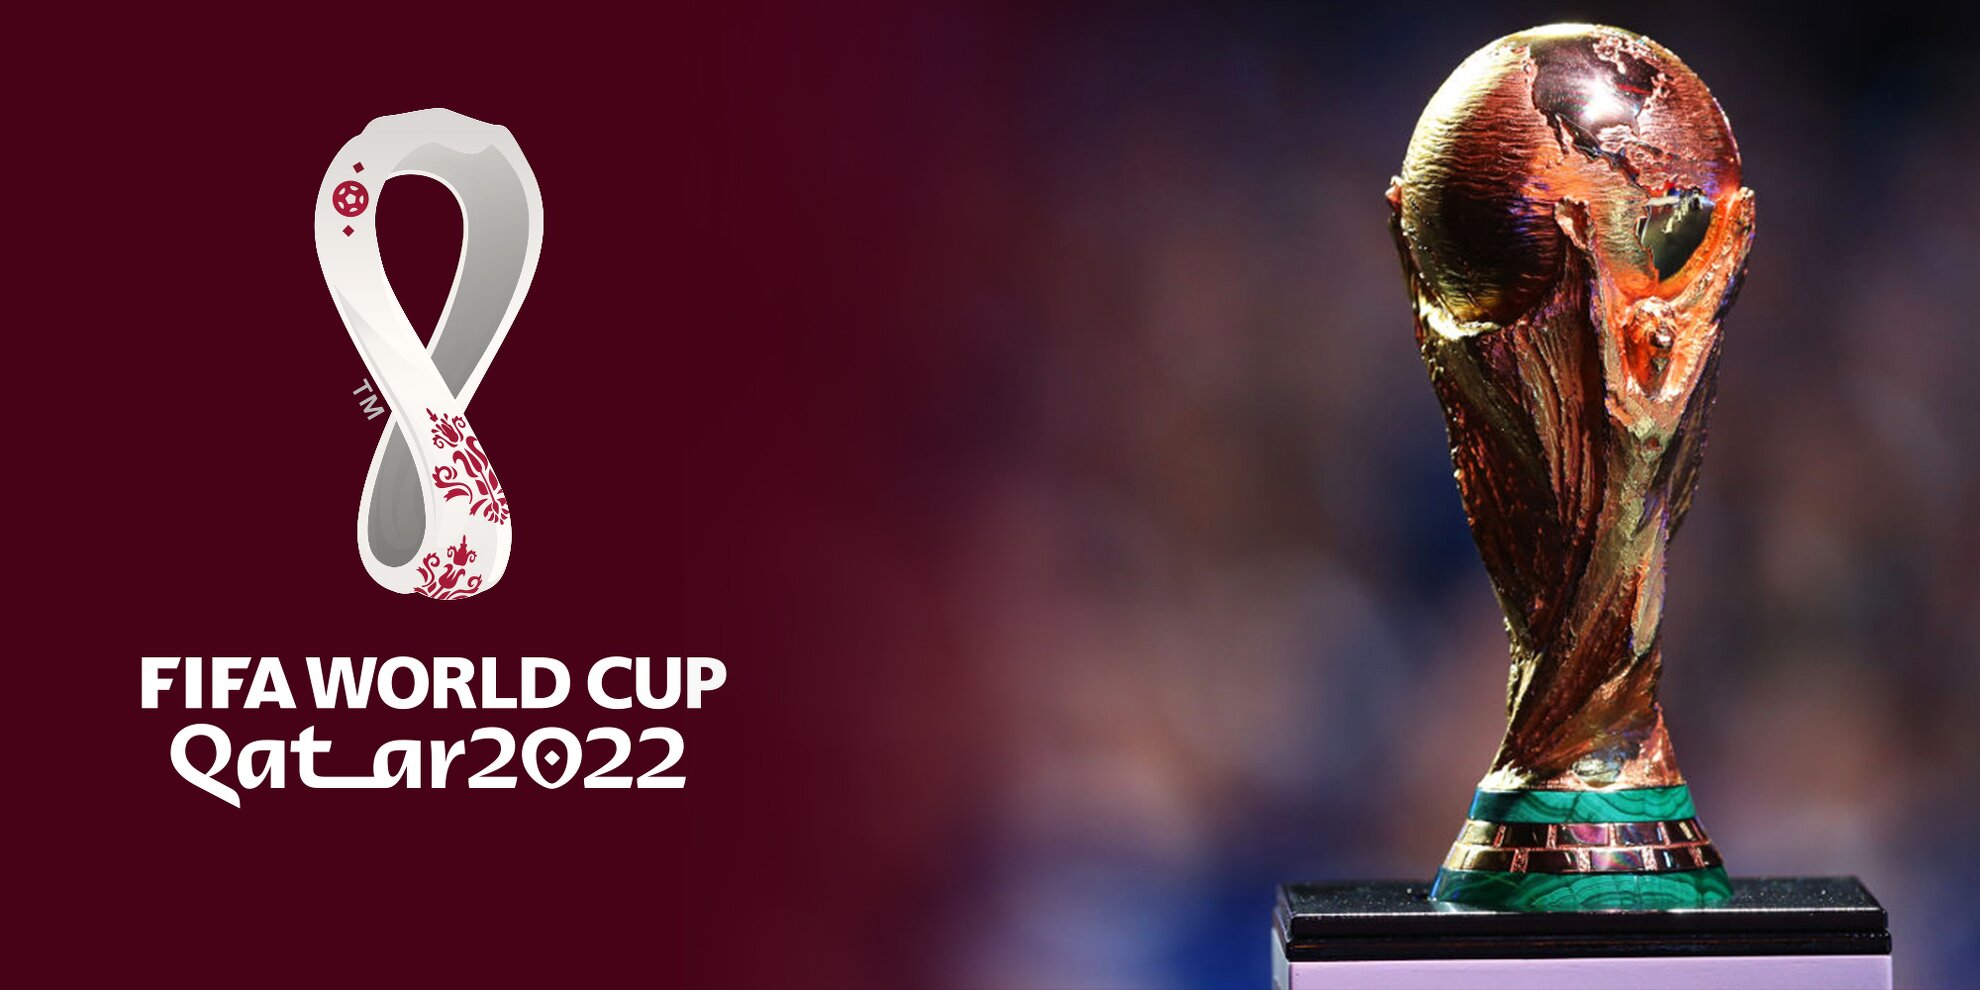 Know the key rules introduced by Qatar government for FIFA World Cup 2022